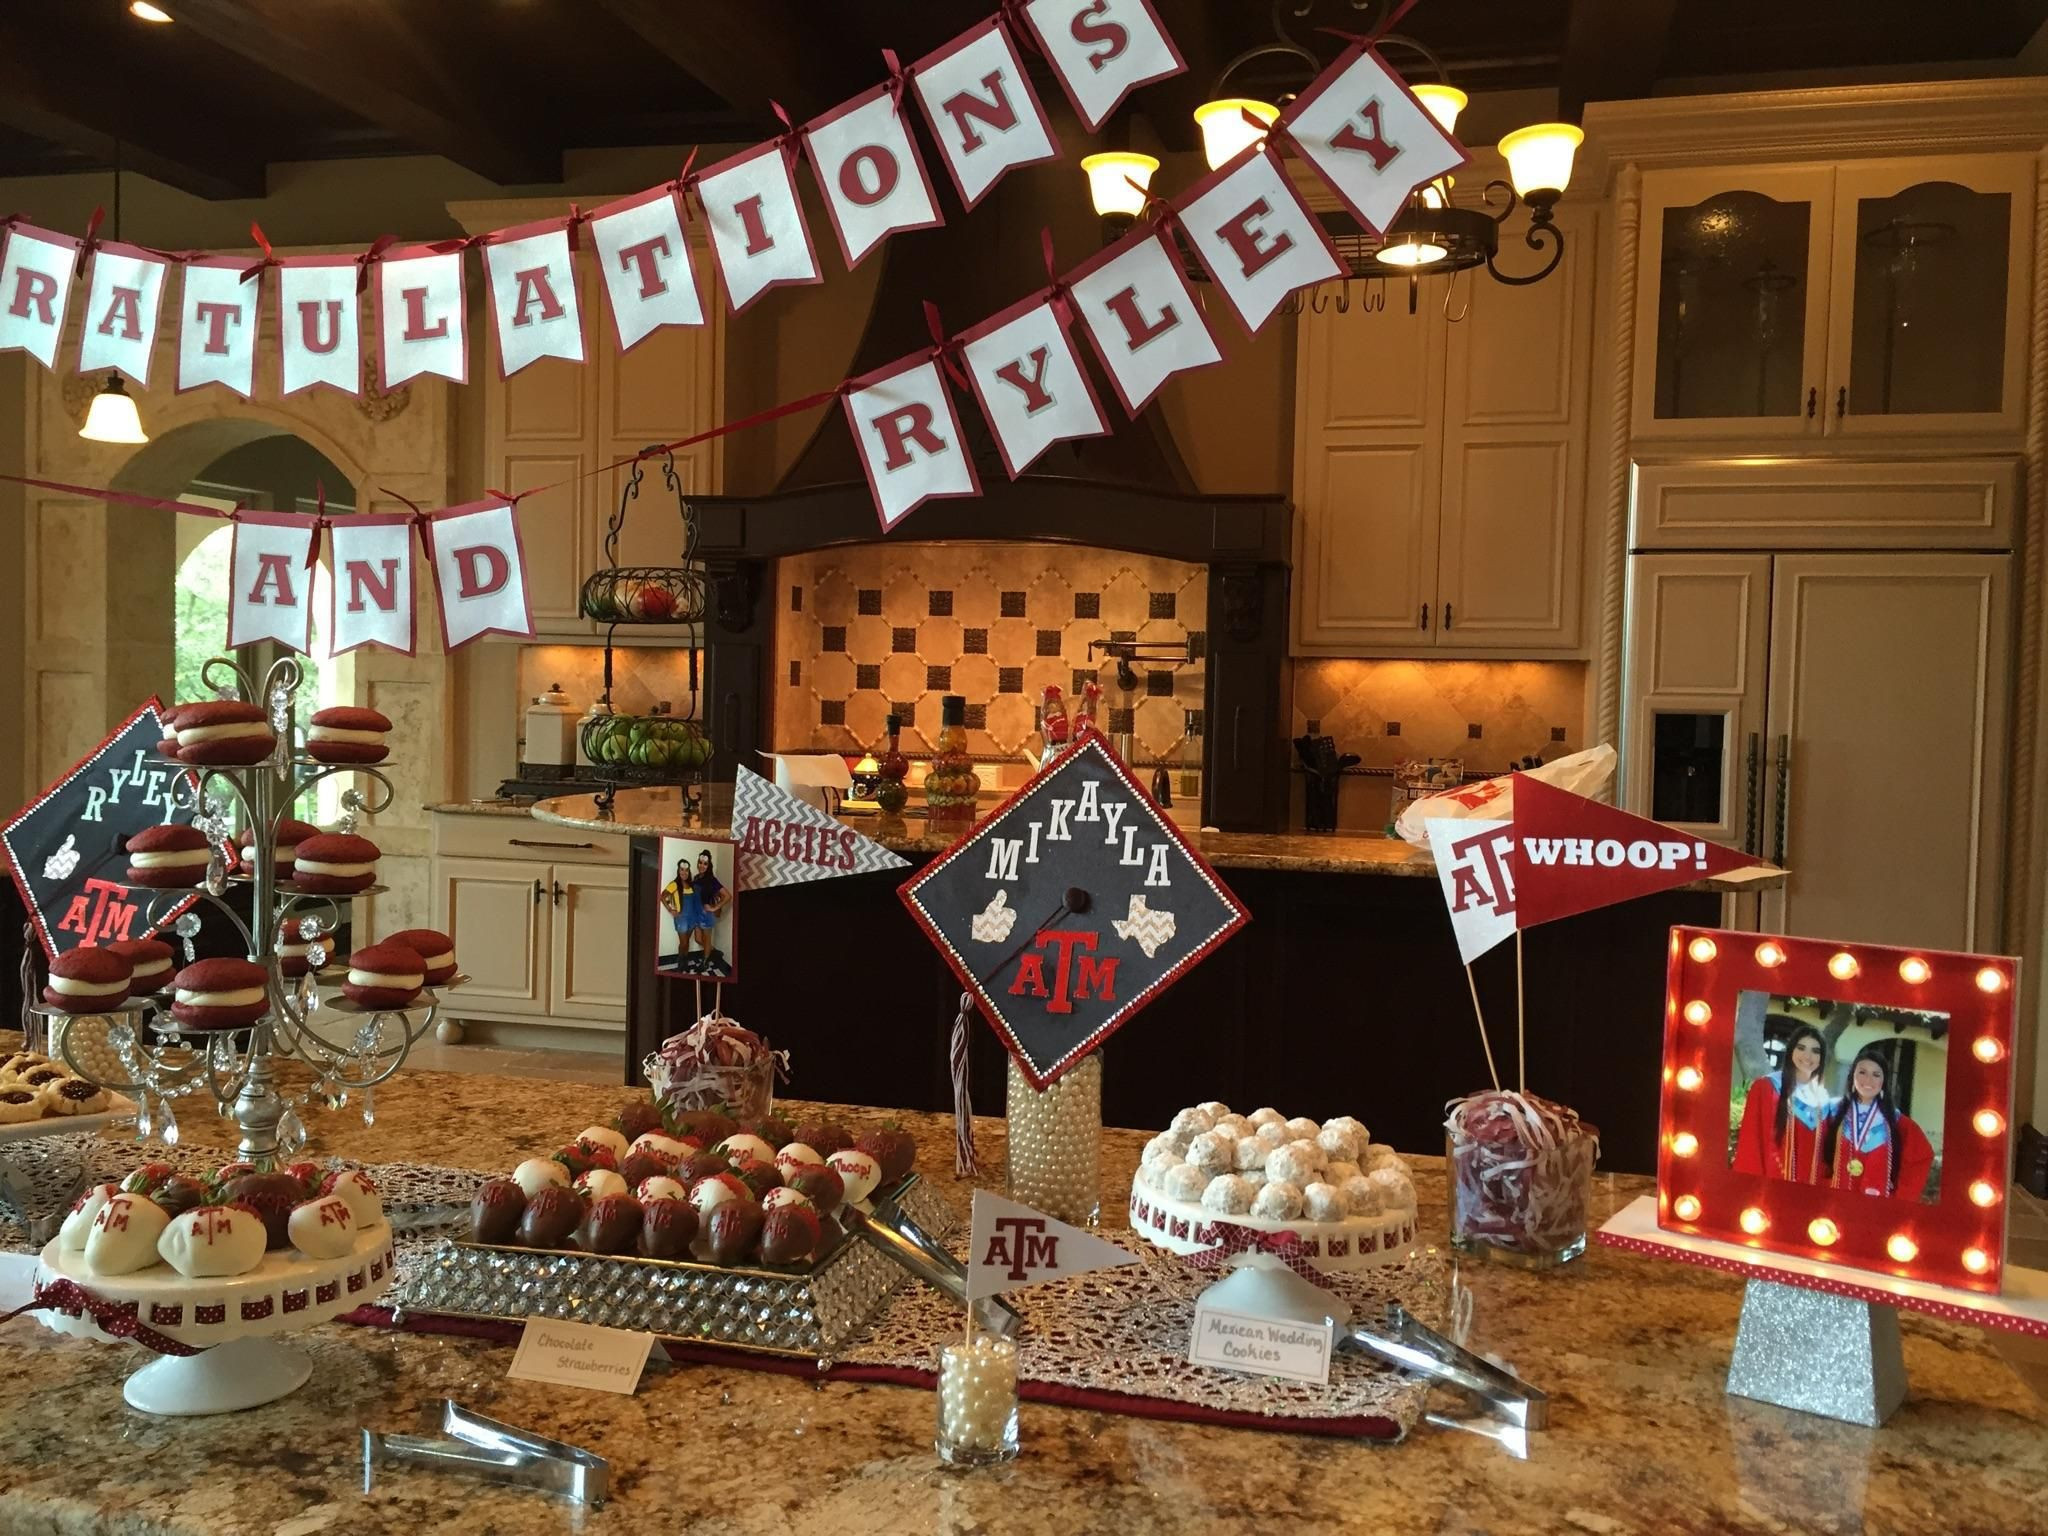 Graduation Party Ideas For College Students
 Texas A & M Graduation Party